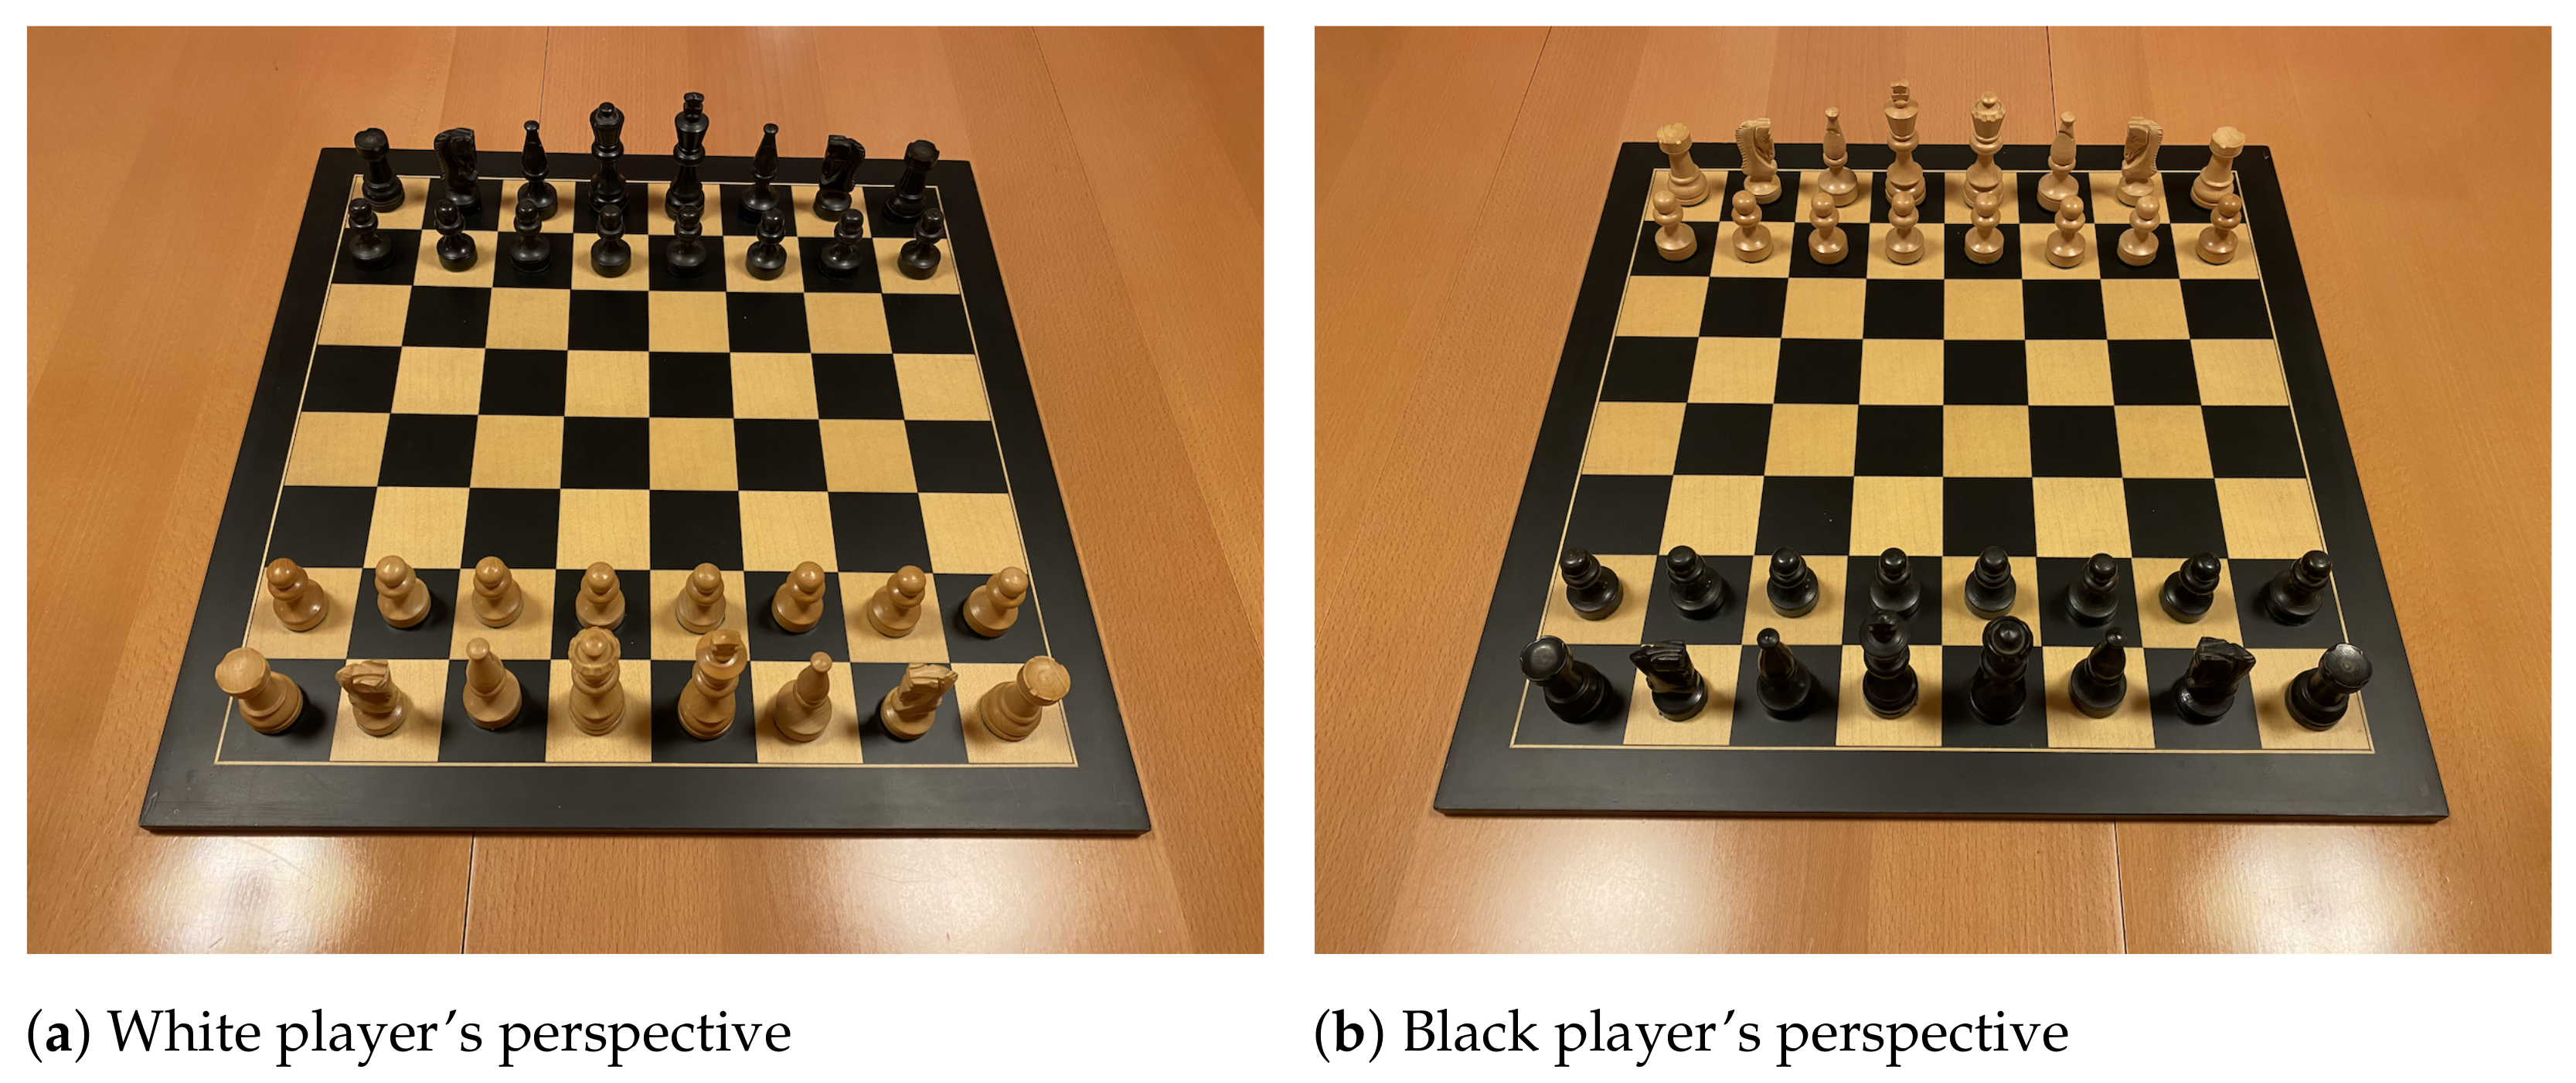 Represent Chess Boards Digitally with Computer Vision